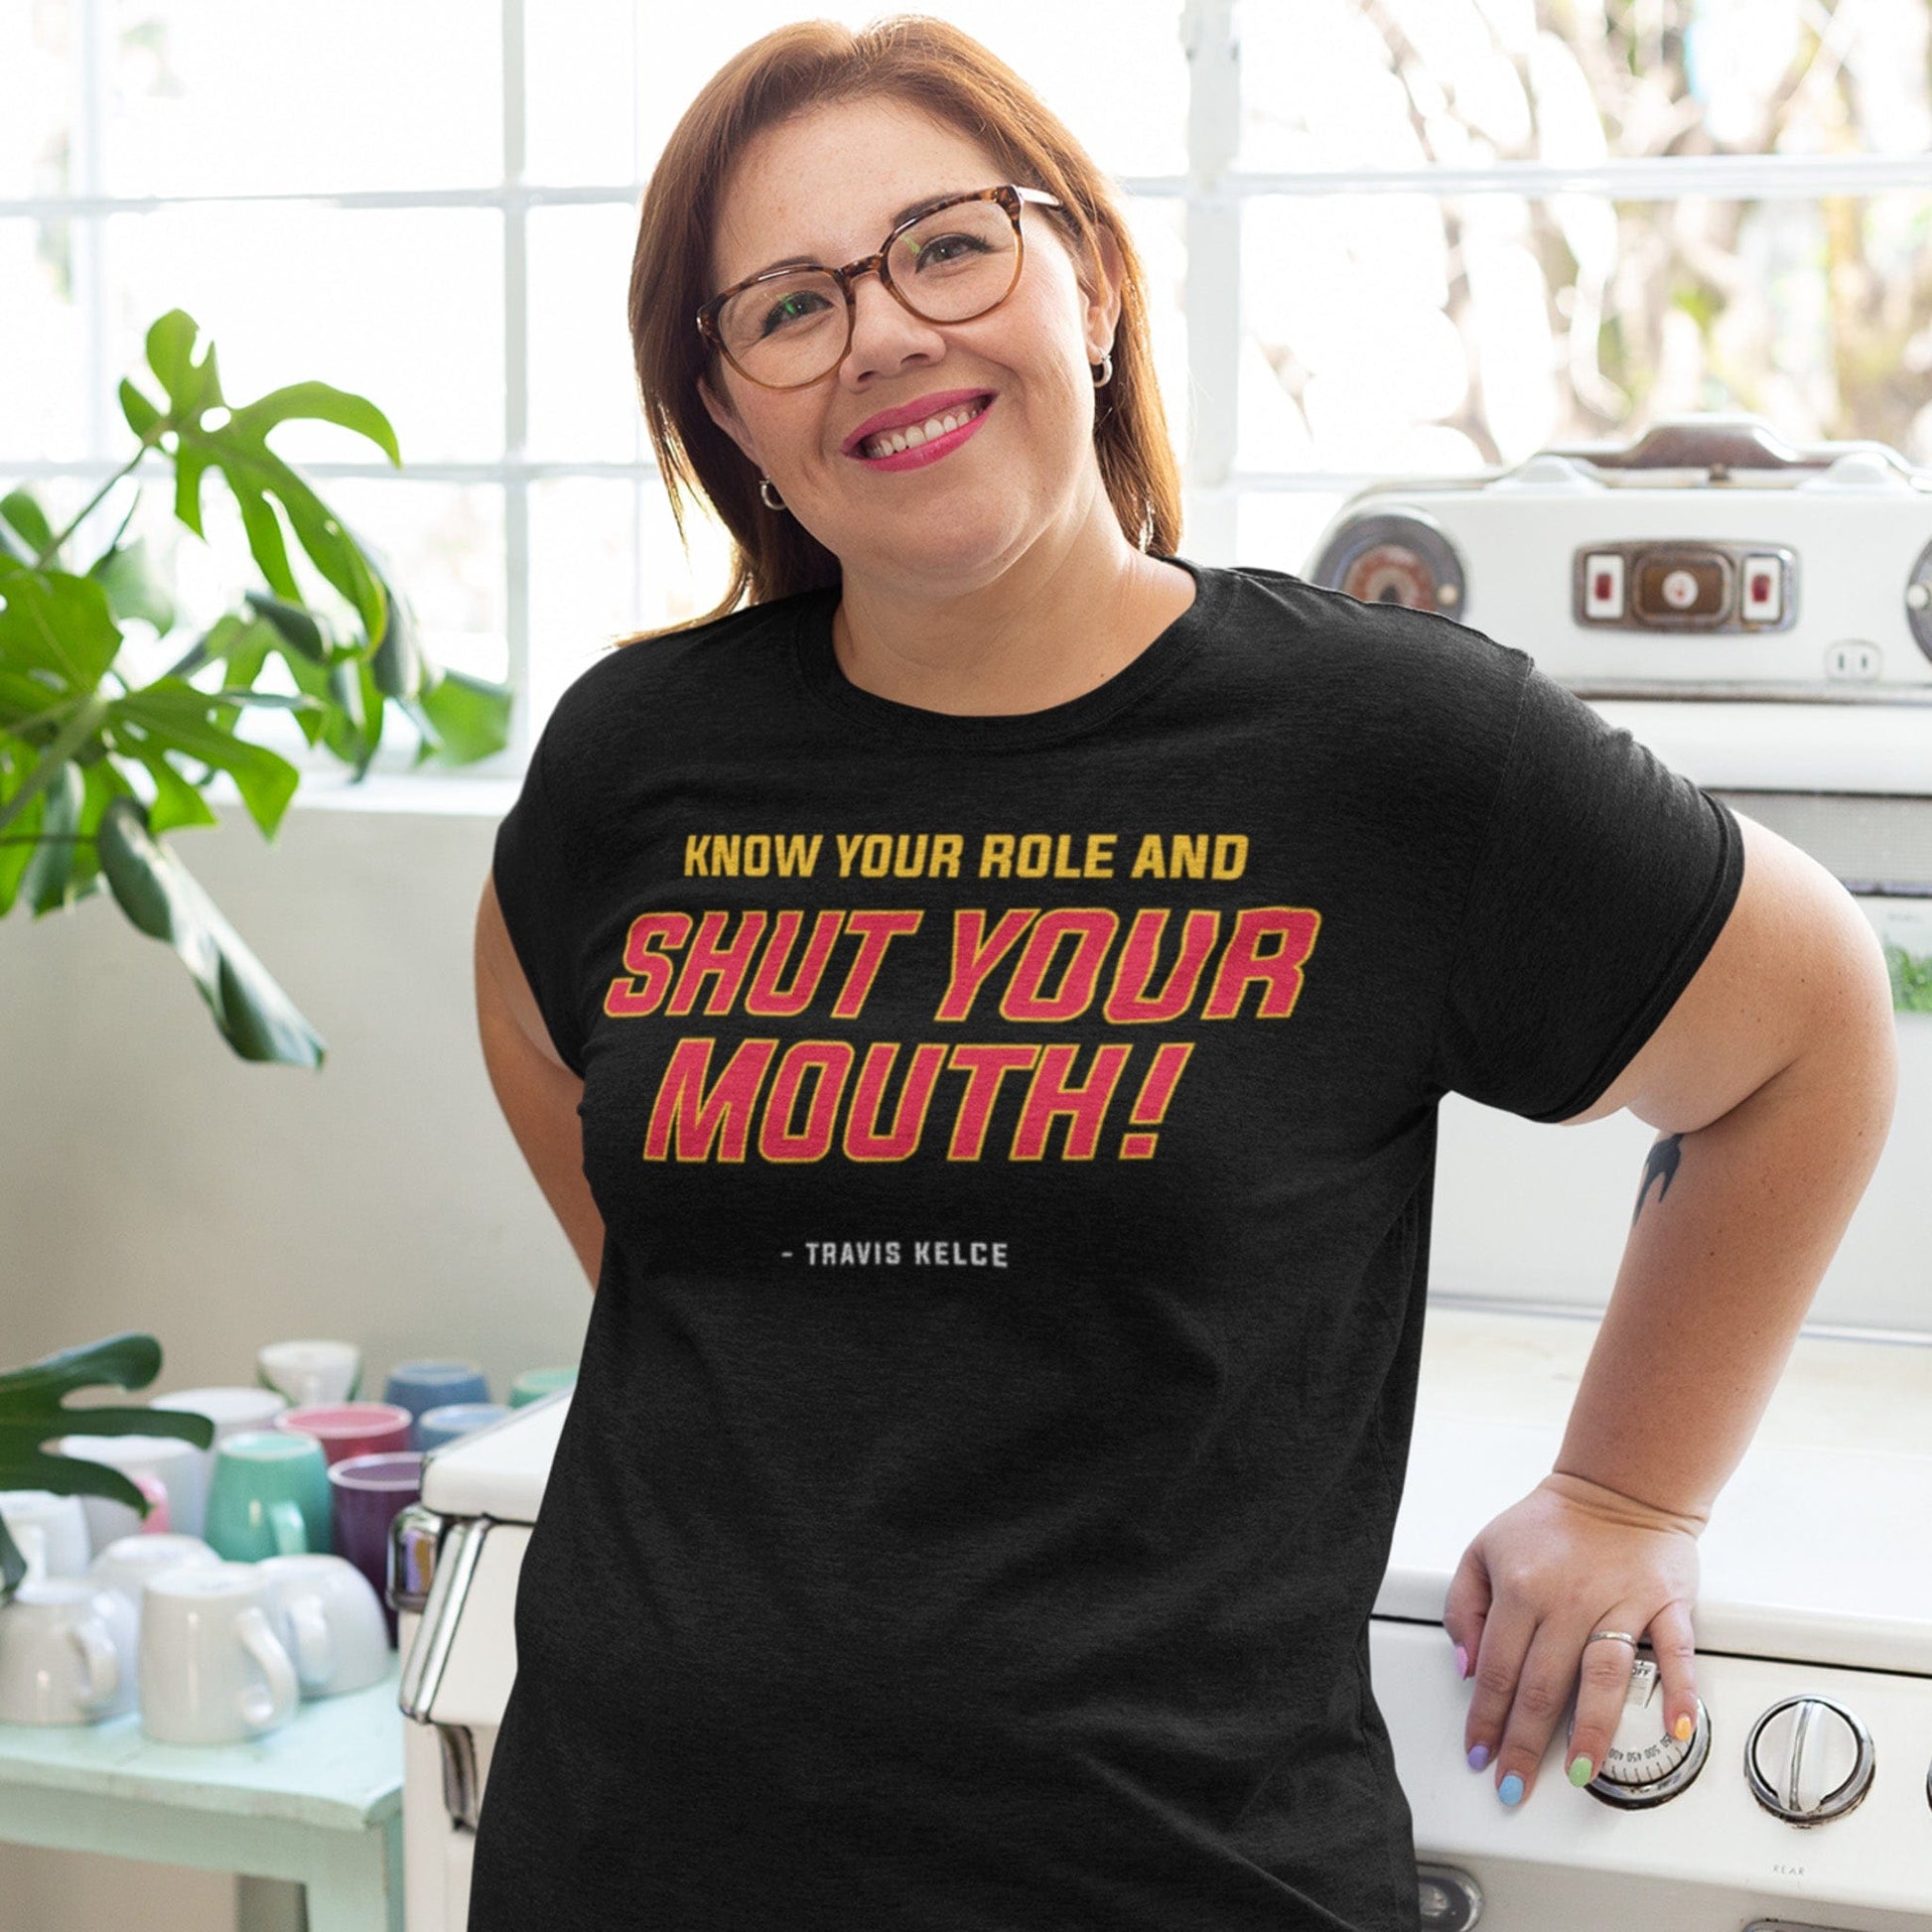 KC Swah Kansas City Chiefs red, yellow, white SHUT YOUR MOUTH on heather black unisex t-shirt worn by female model leaning on stove in bright kitchen